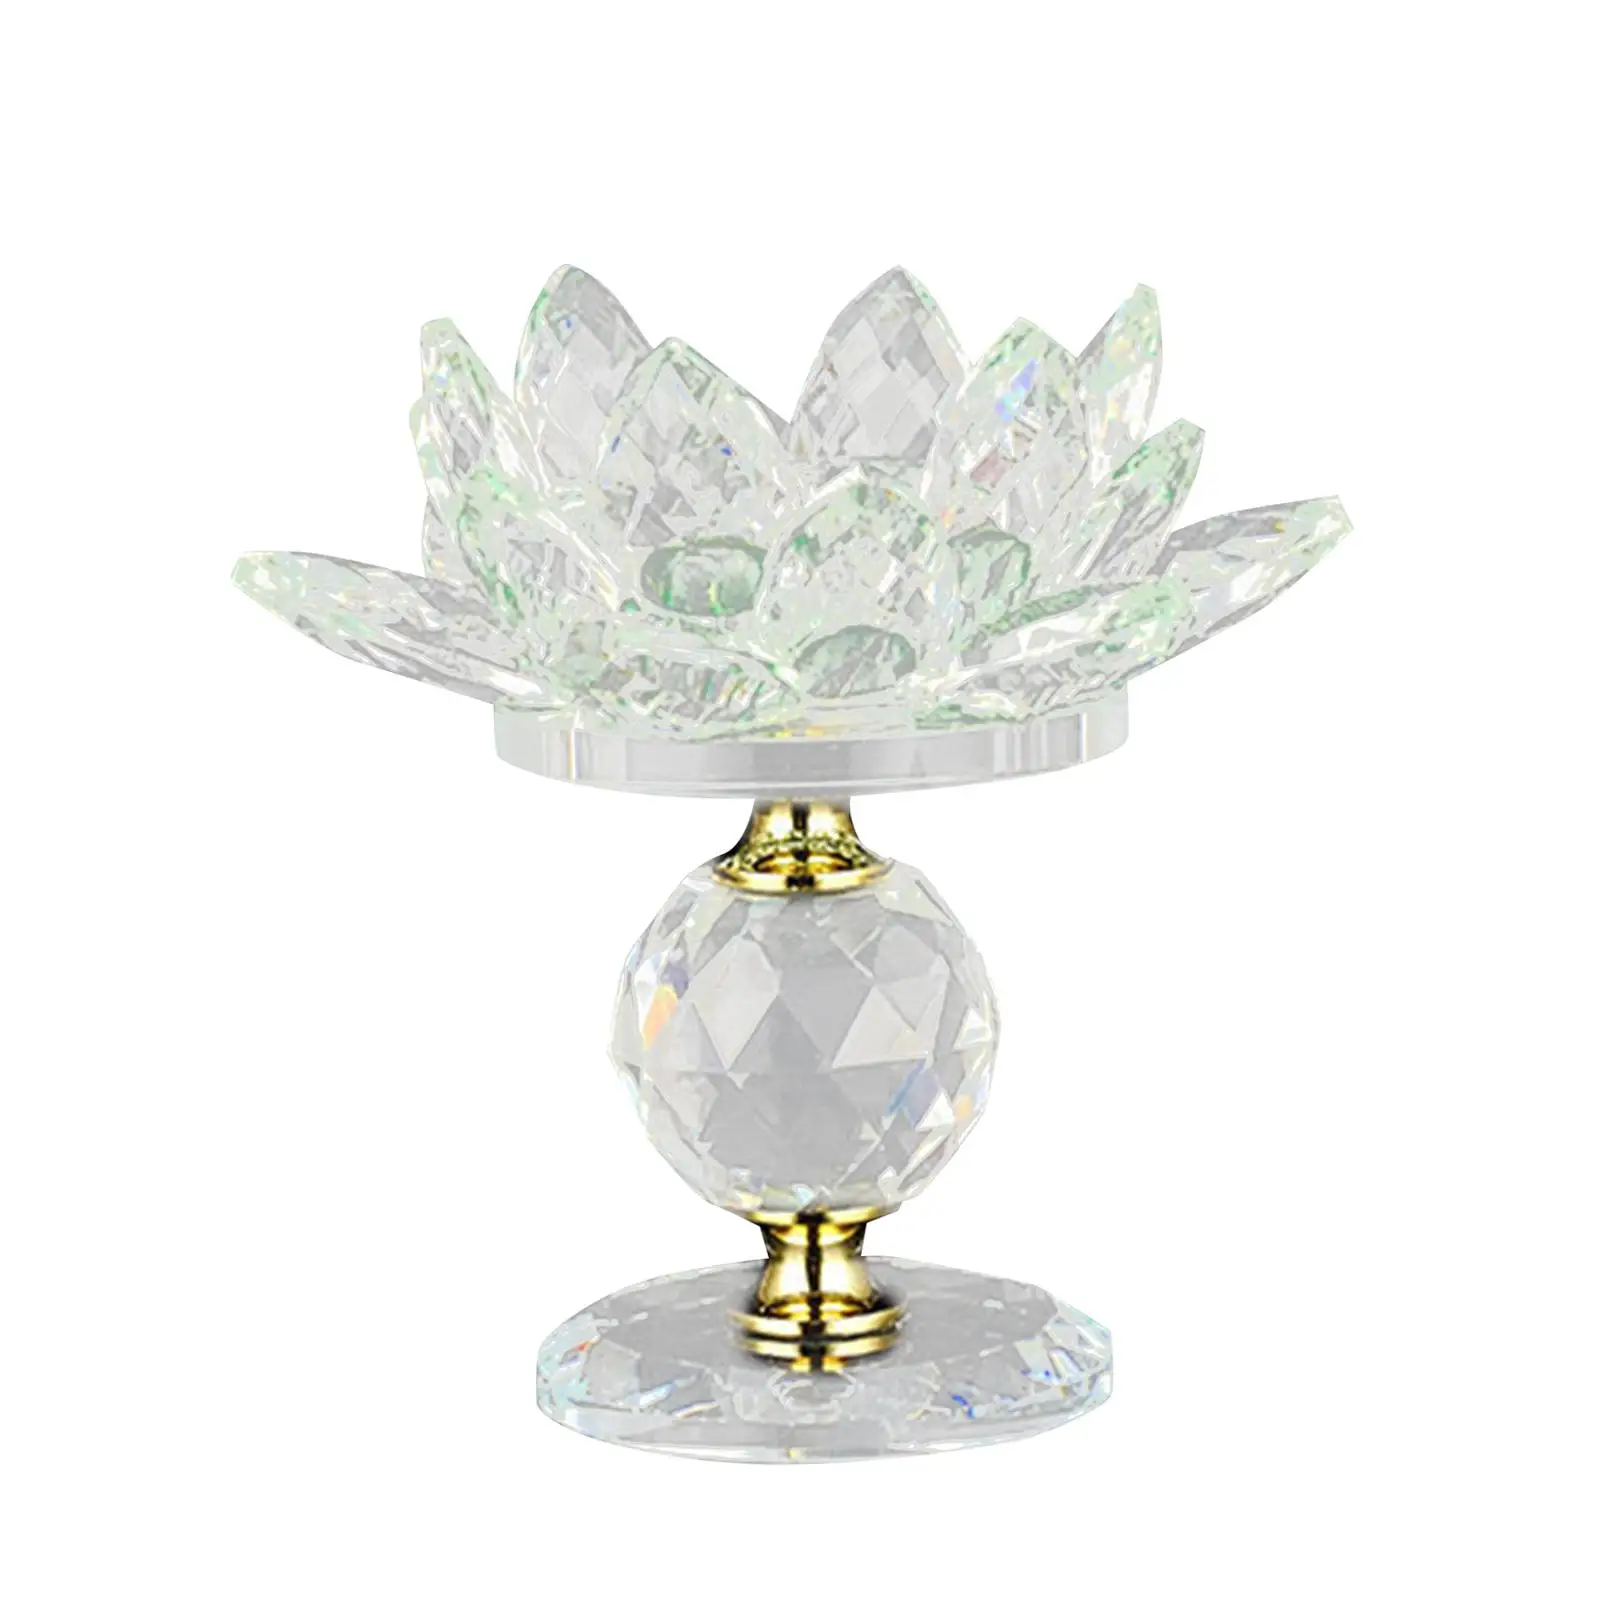 Crystal Glass Lotus Candle Holders for Home Decoration Votive Tealight Holders Wedding Gift